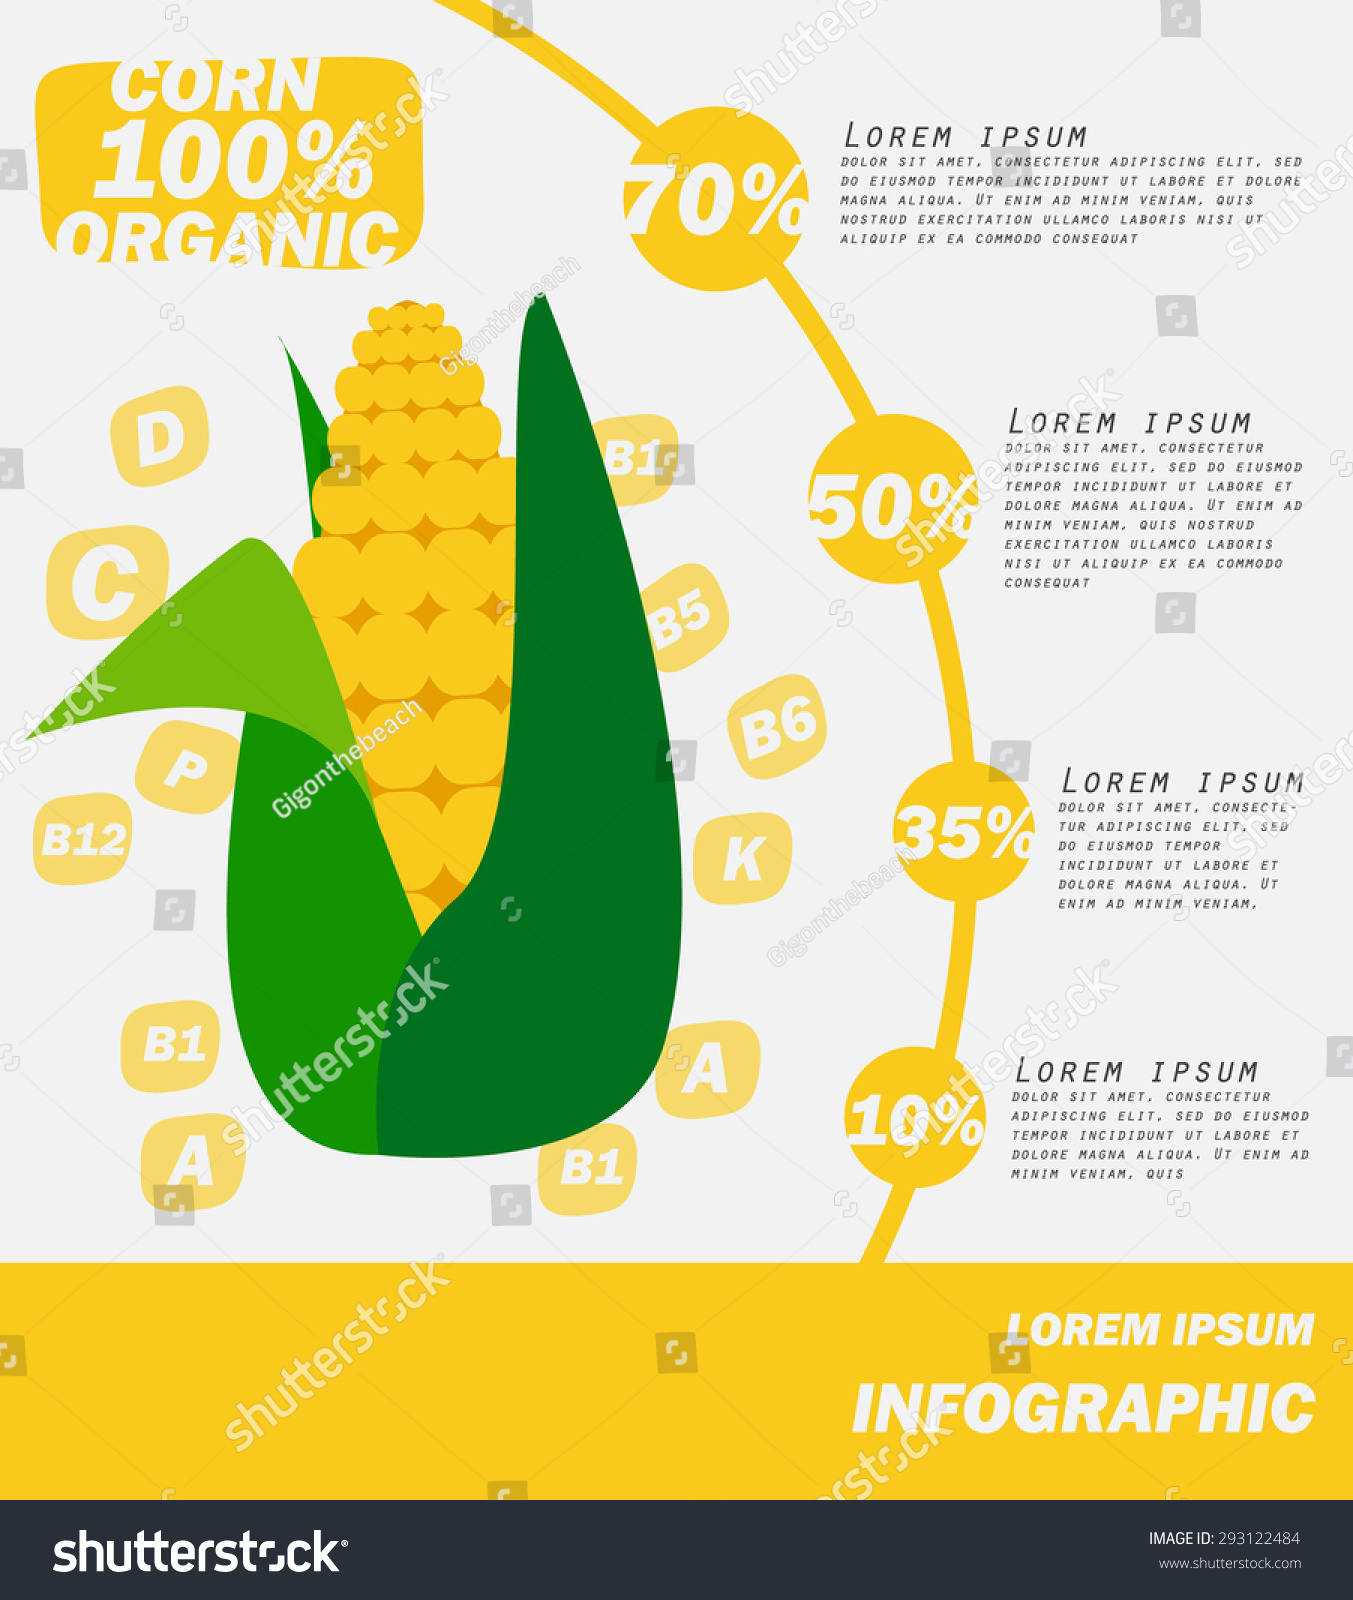 Corn Infographics Vegetables Vector Illustration Stock Vector Royalty Free 293122484 6307